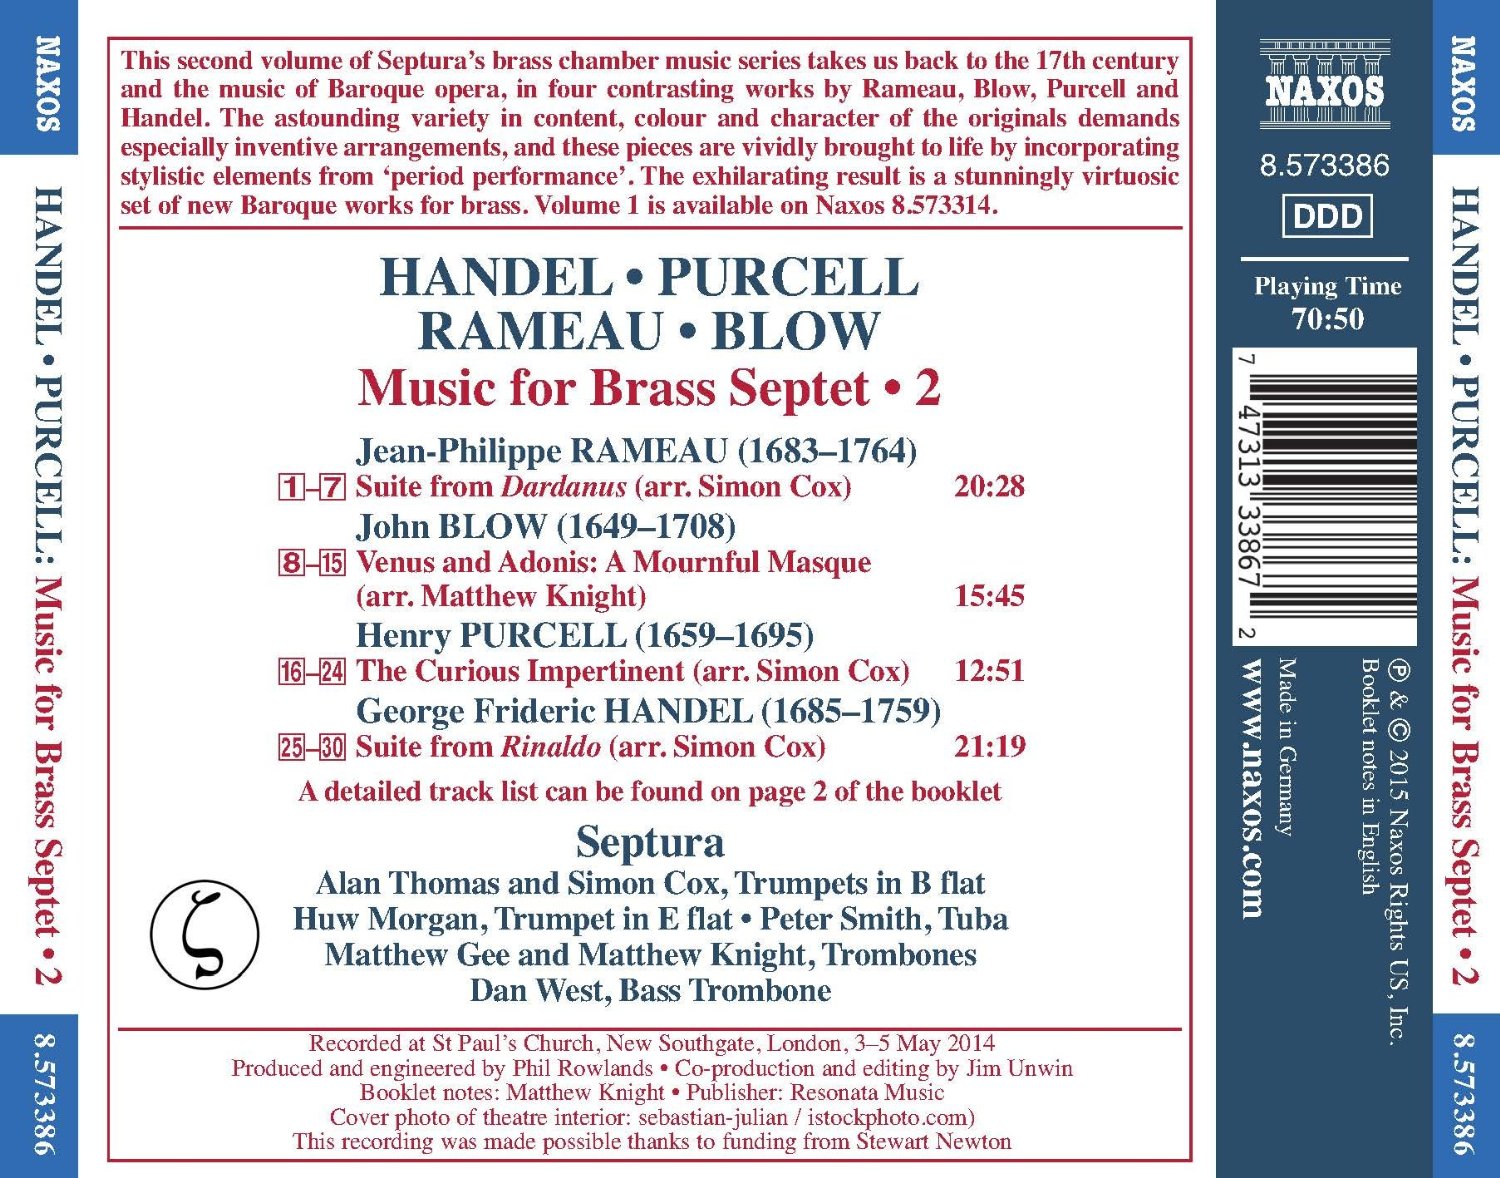 Music for Brass Septet, Vol. 2 - Instrumental suites from operas by Rameau, Blow, Purcell & Handel / Septura back cover